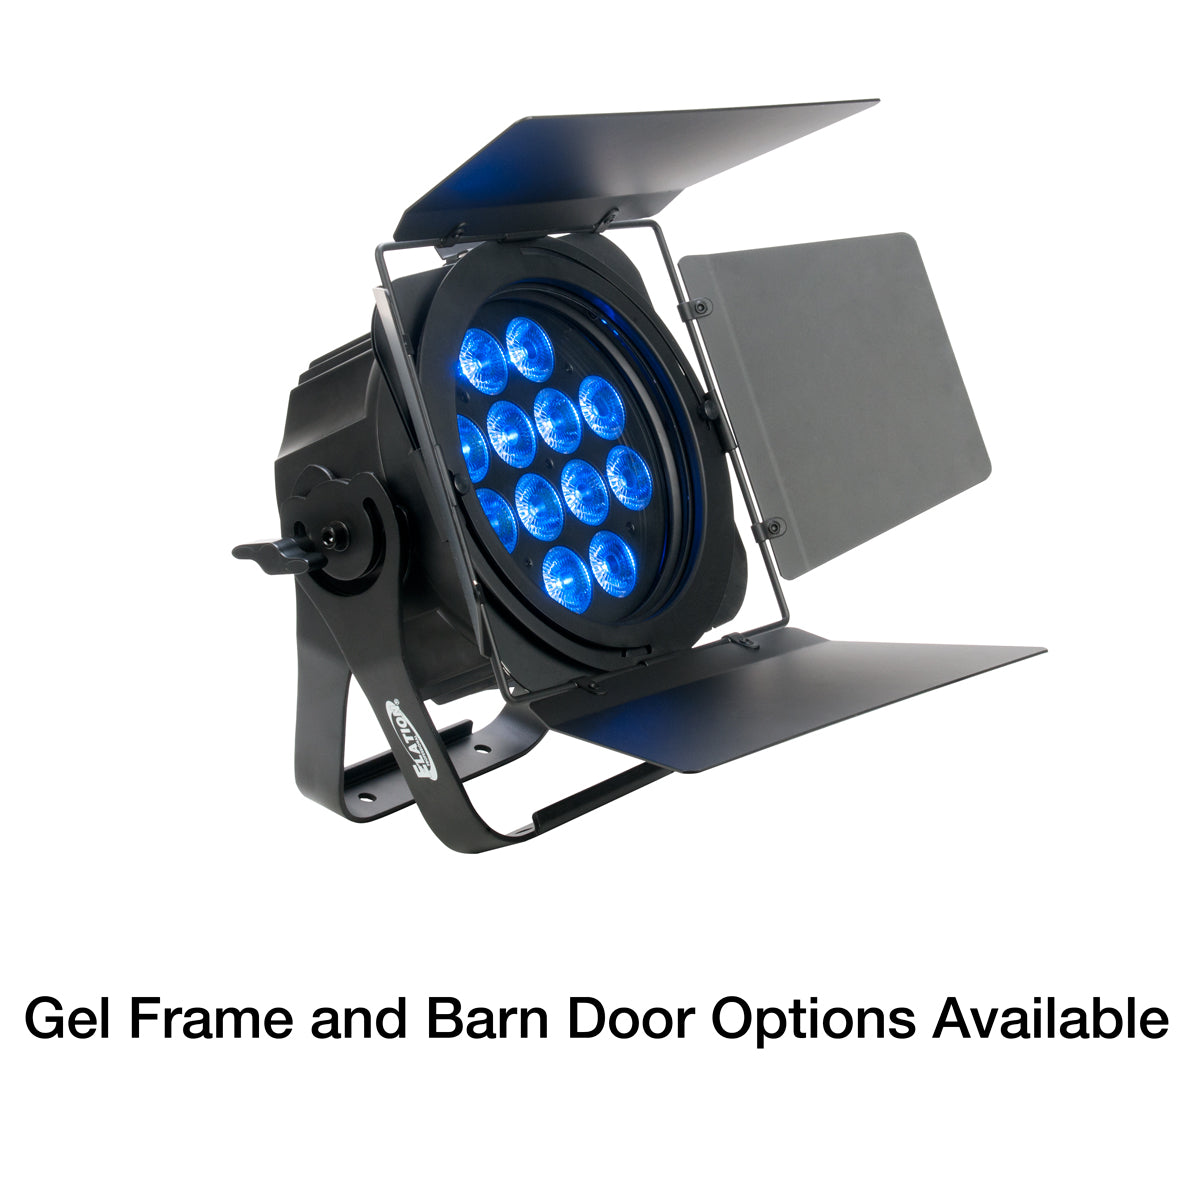 Elation SIXPAR 200 - 6-in-1 LED PAR 12x12W Fixture, gel frame and barn door options available